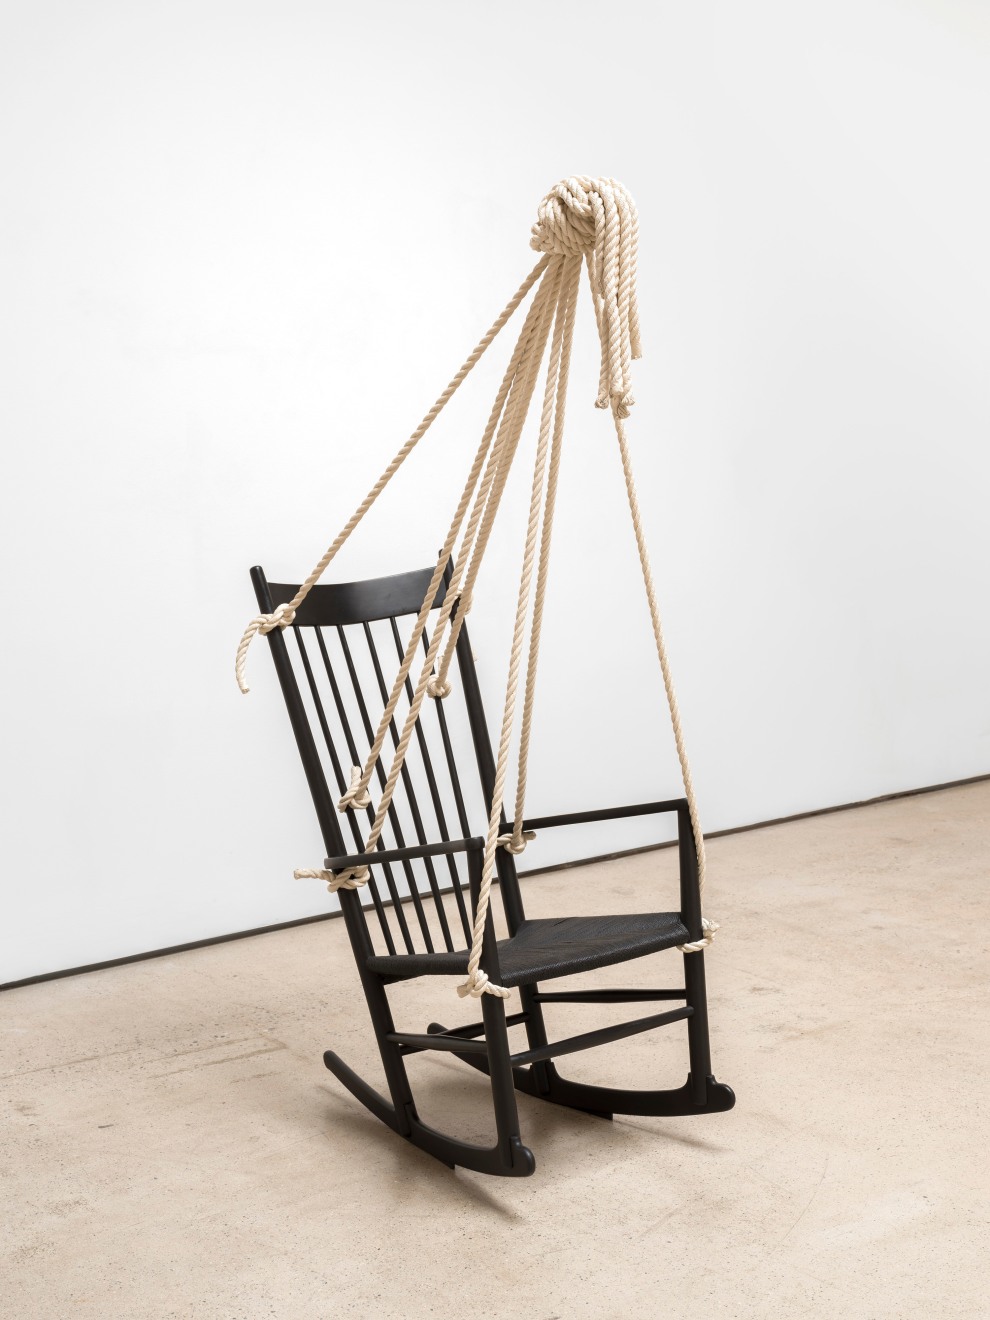 Ricky Swallow, Rocking Chair with Rope (meditation chair #1), 2020